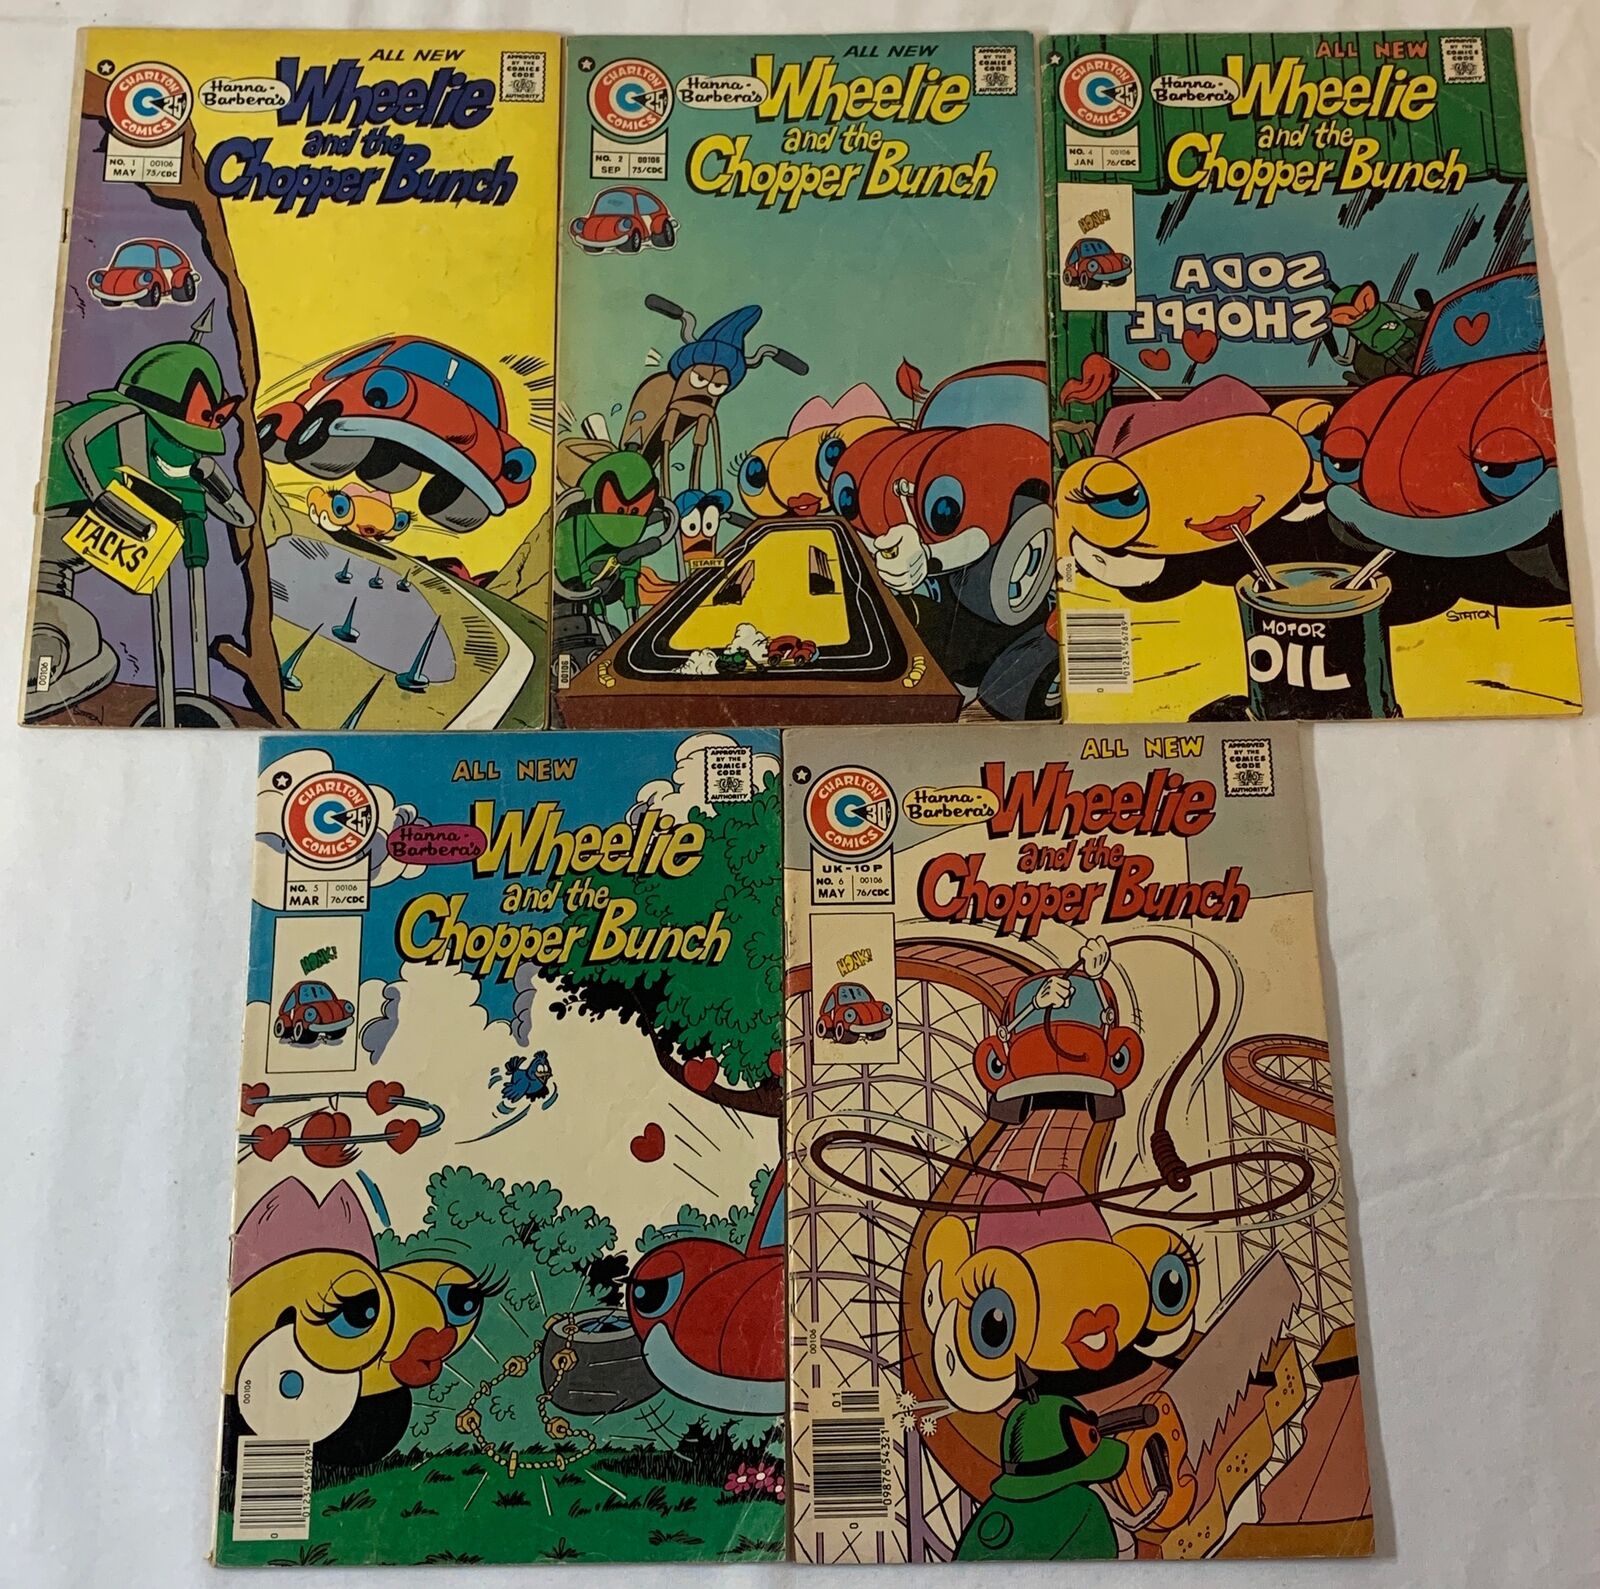 Charlton WHEELIE AND THE CHOPPER BUNCH #1 2 4 5 6 ~ mostly lower grade